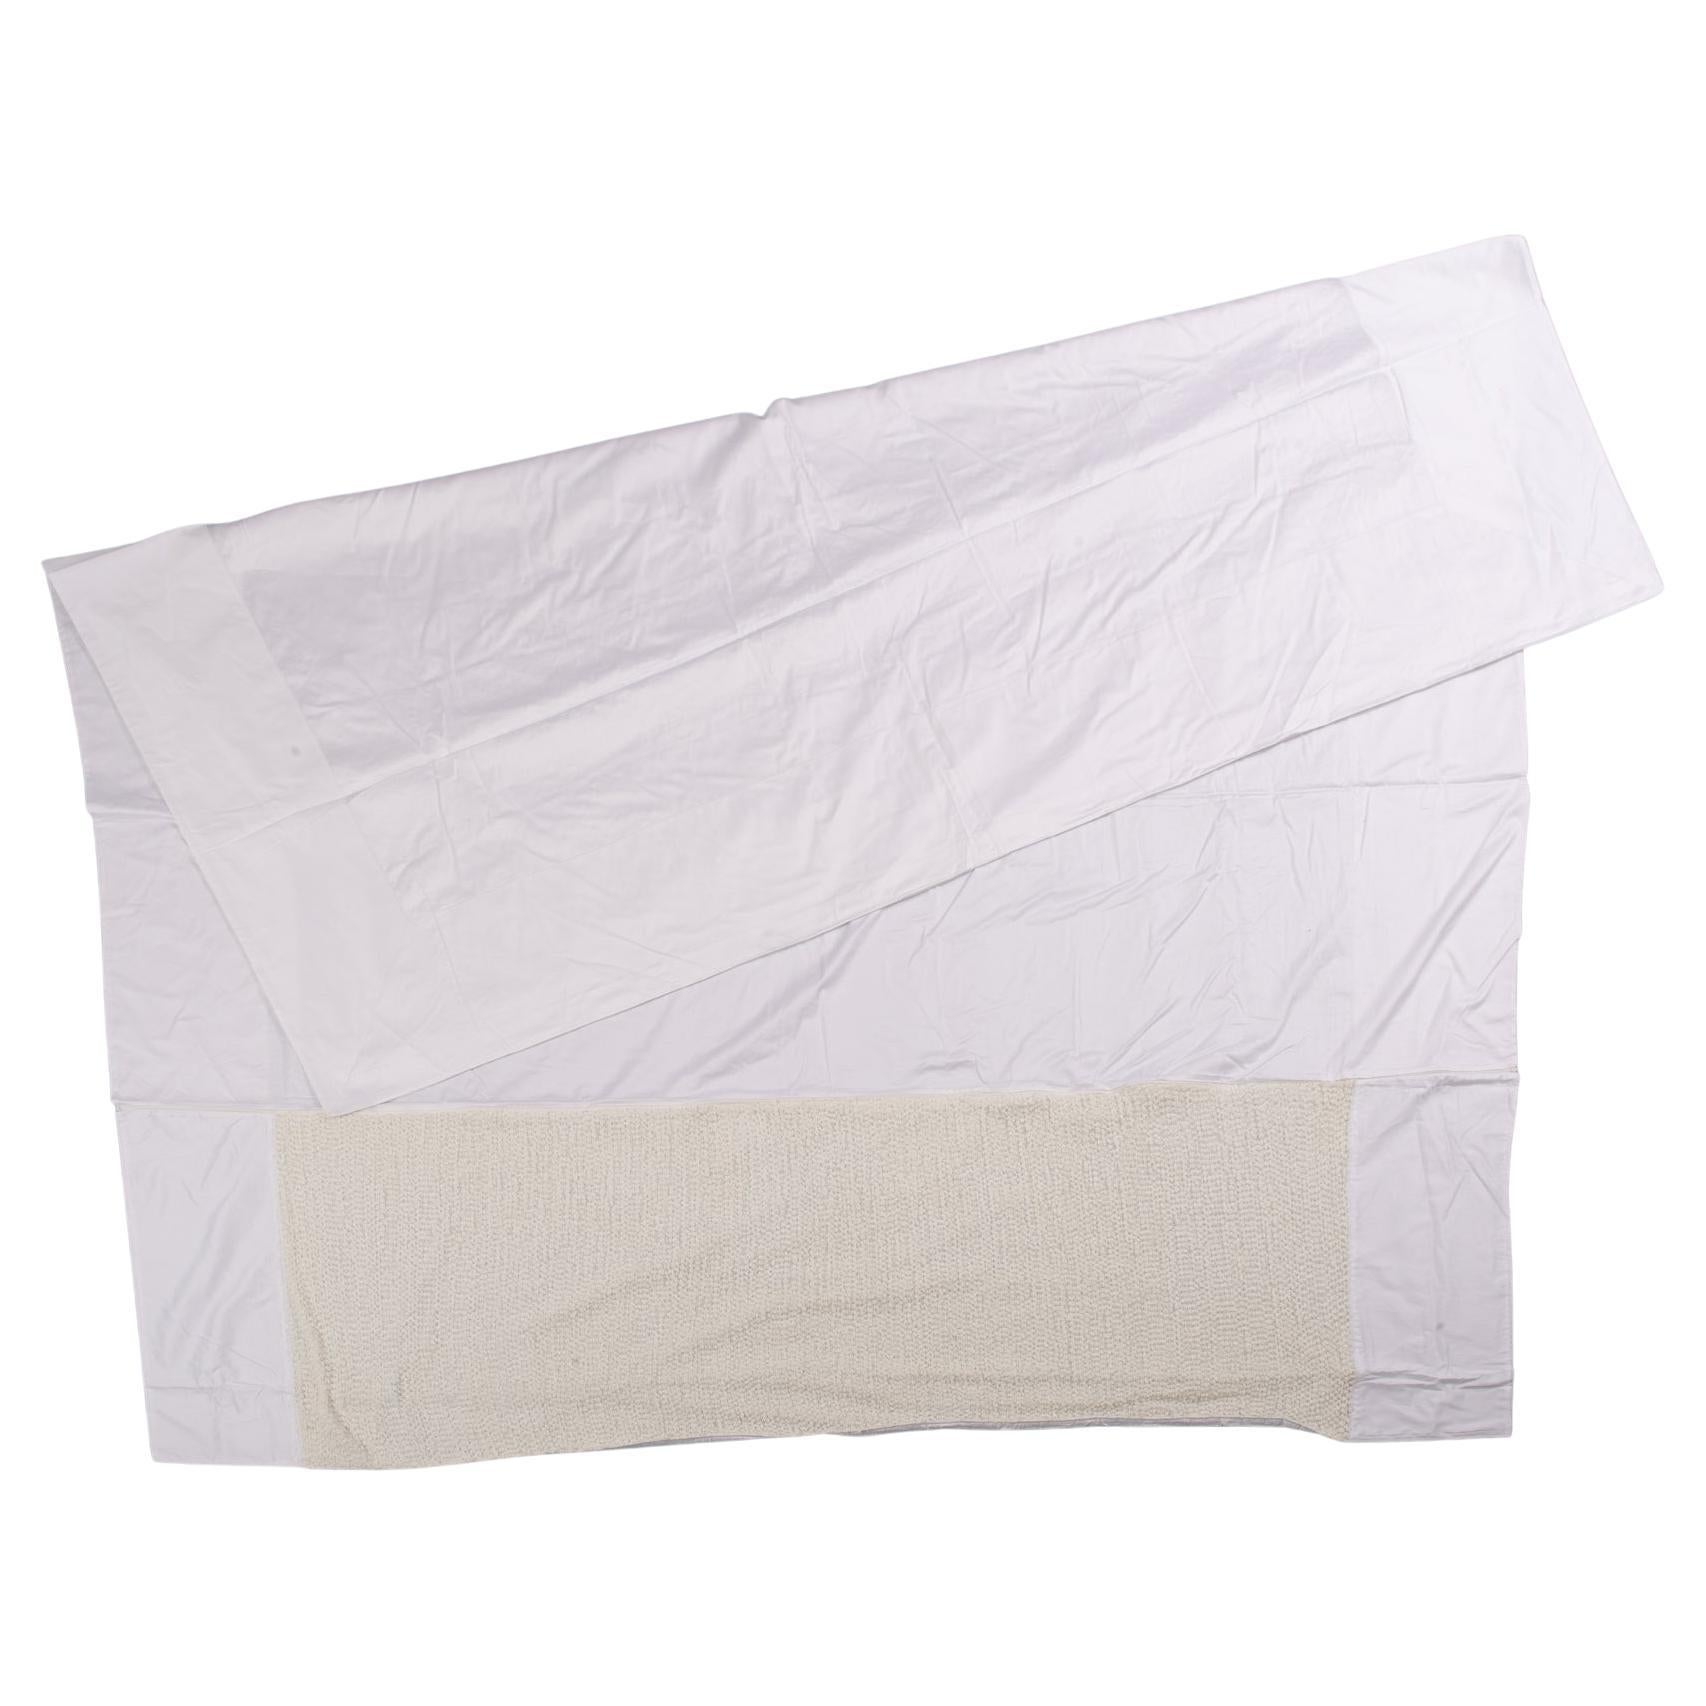 Double duvet cover with pair of pillowcases : with a very good price for closing activites.
The duvet cover is very large, as You can see on description, and very elegant. By Maison Clair.